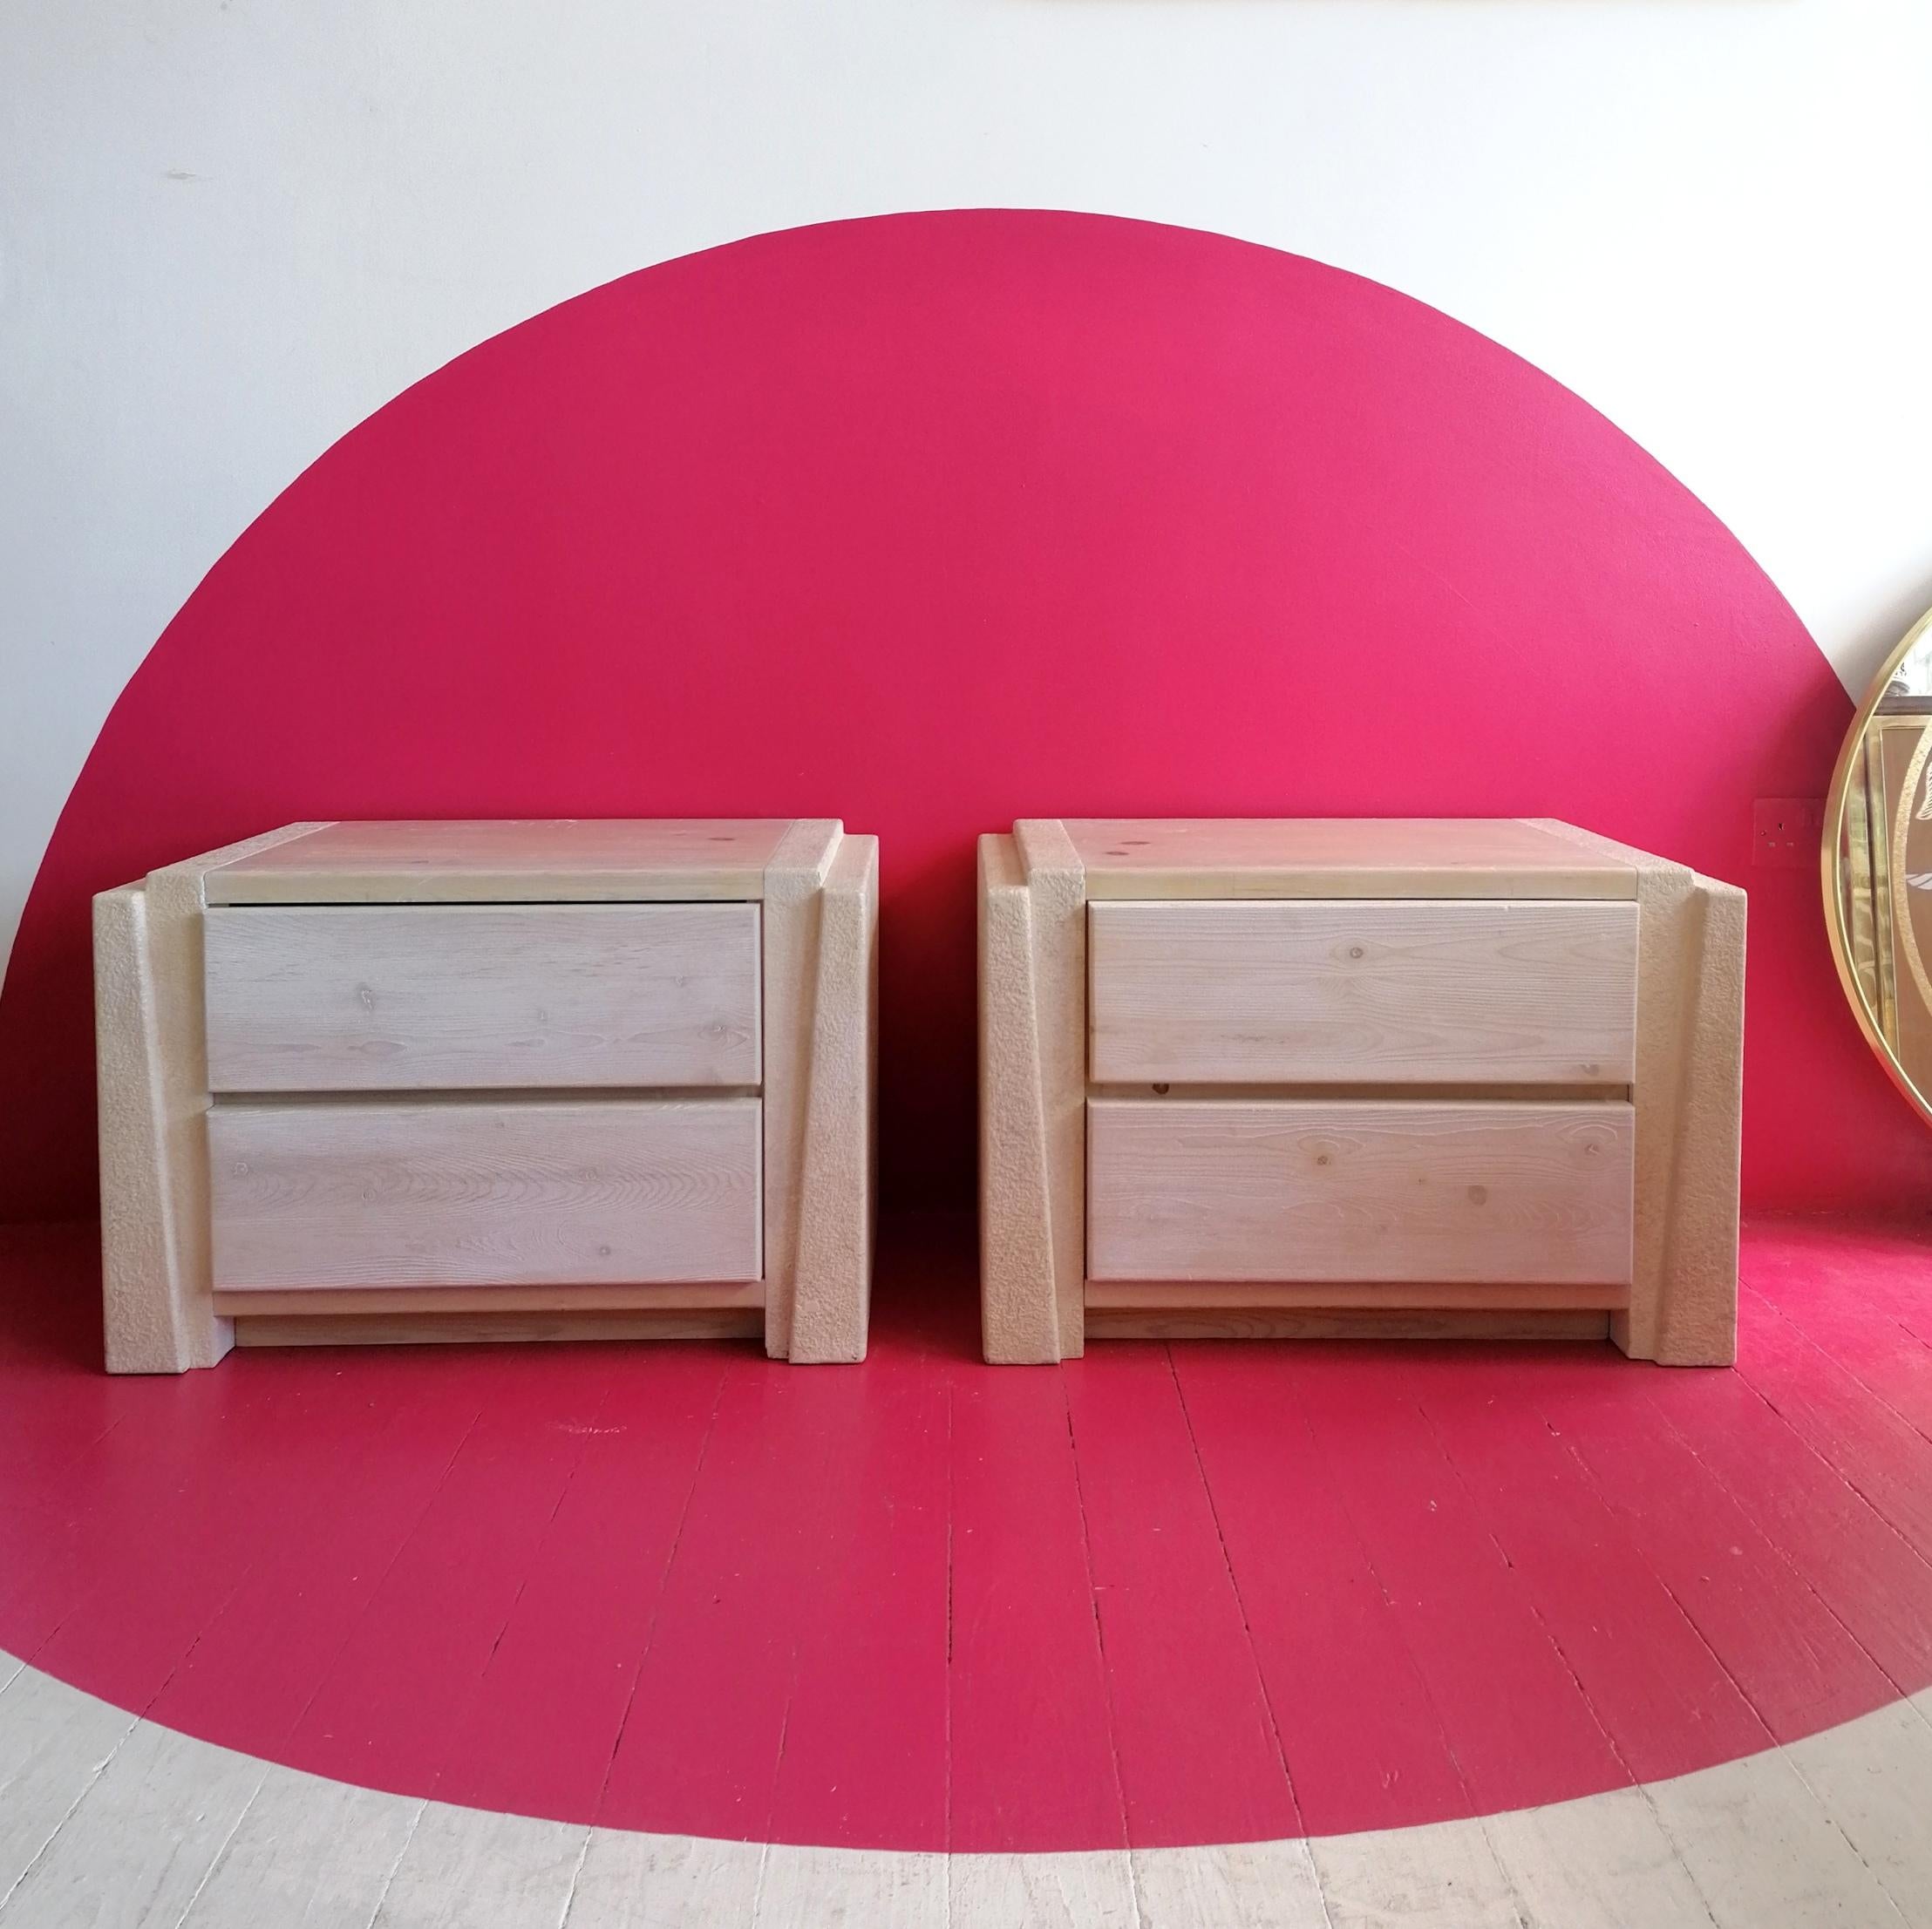 A pair of supercool large postmodern American nightstands / bedside cabinets, made from cerused / limed pine & textured plaster. They have a strong architectural look, with brutalist influences.
A bit of surface wear to the tops, commensurate with